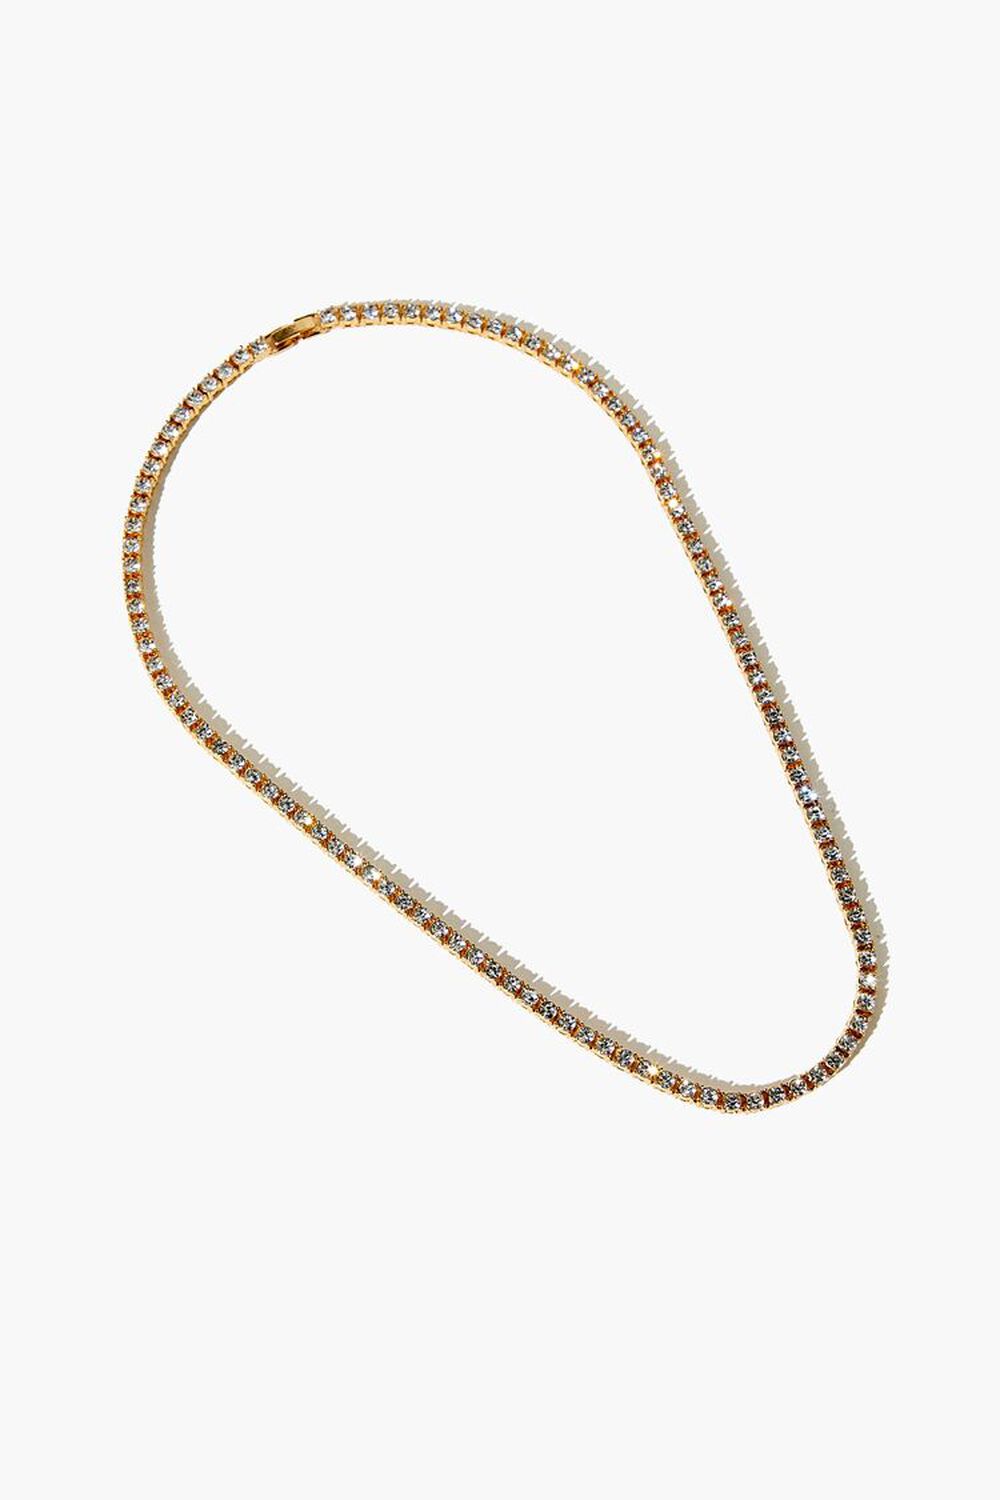 GOLD/CLEAR Men Box Chain Necklace, image 2